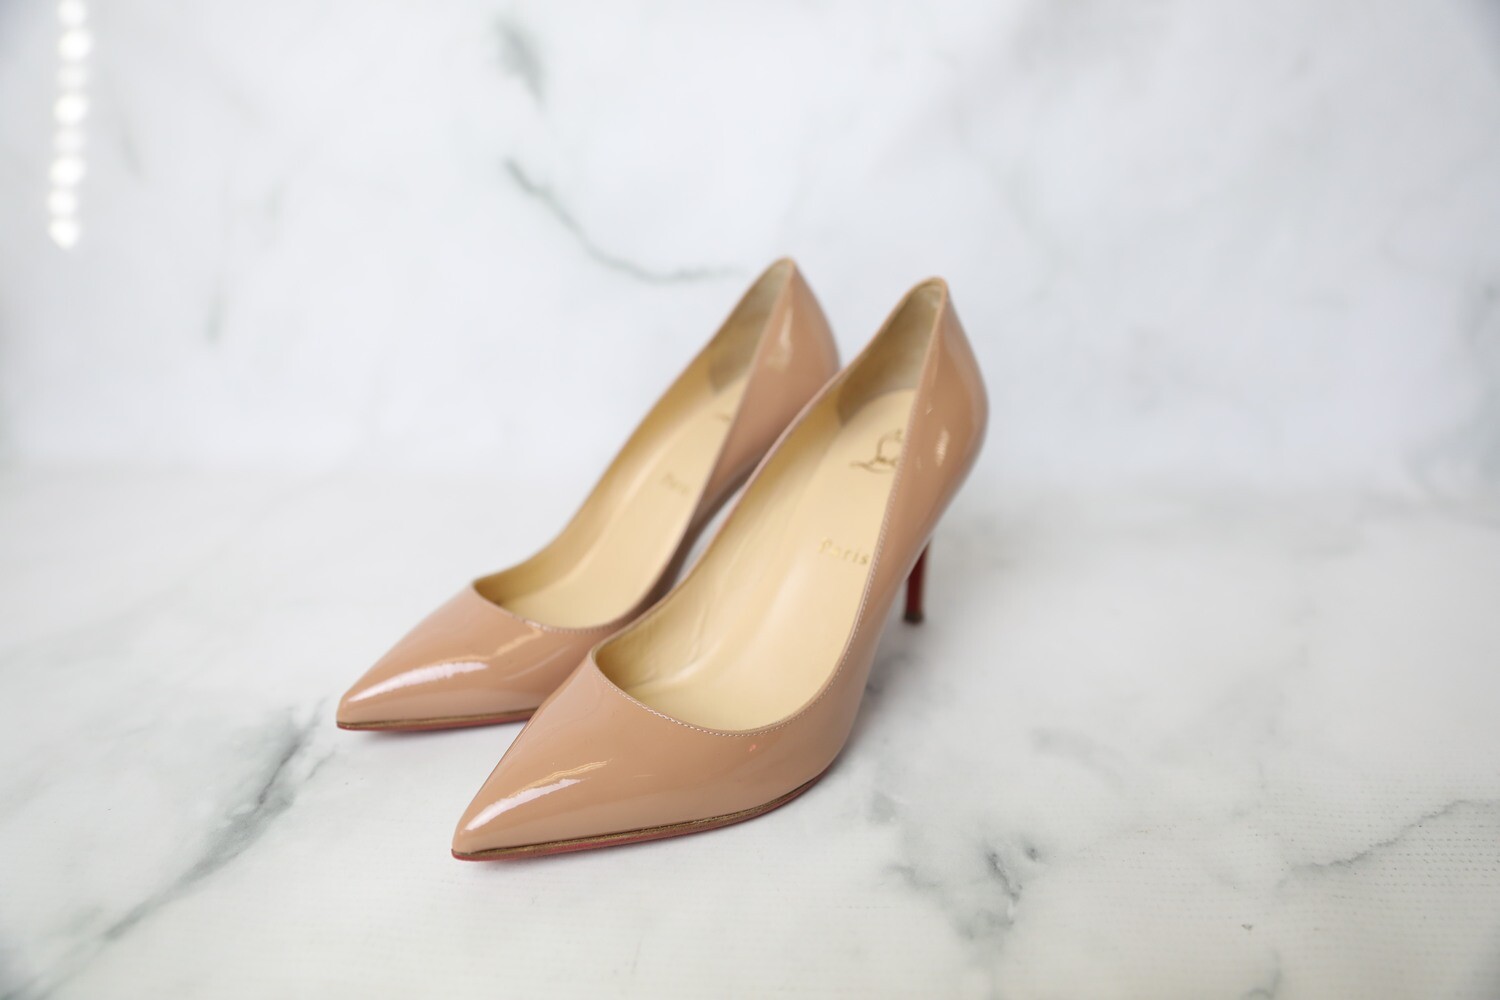 Christian Louboutin Pigaelle 85, Nude Patent, Size 38.5, Preowned in Dustbag WA001